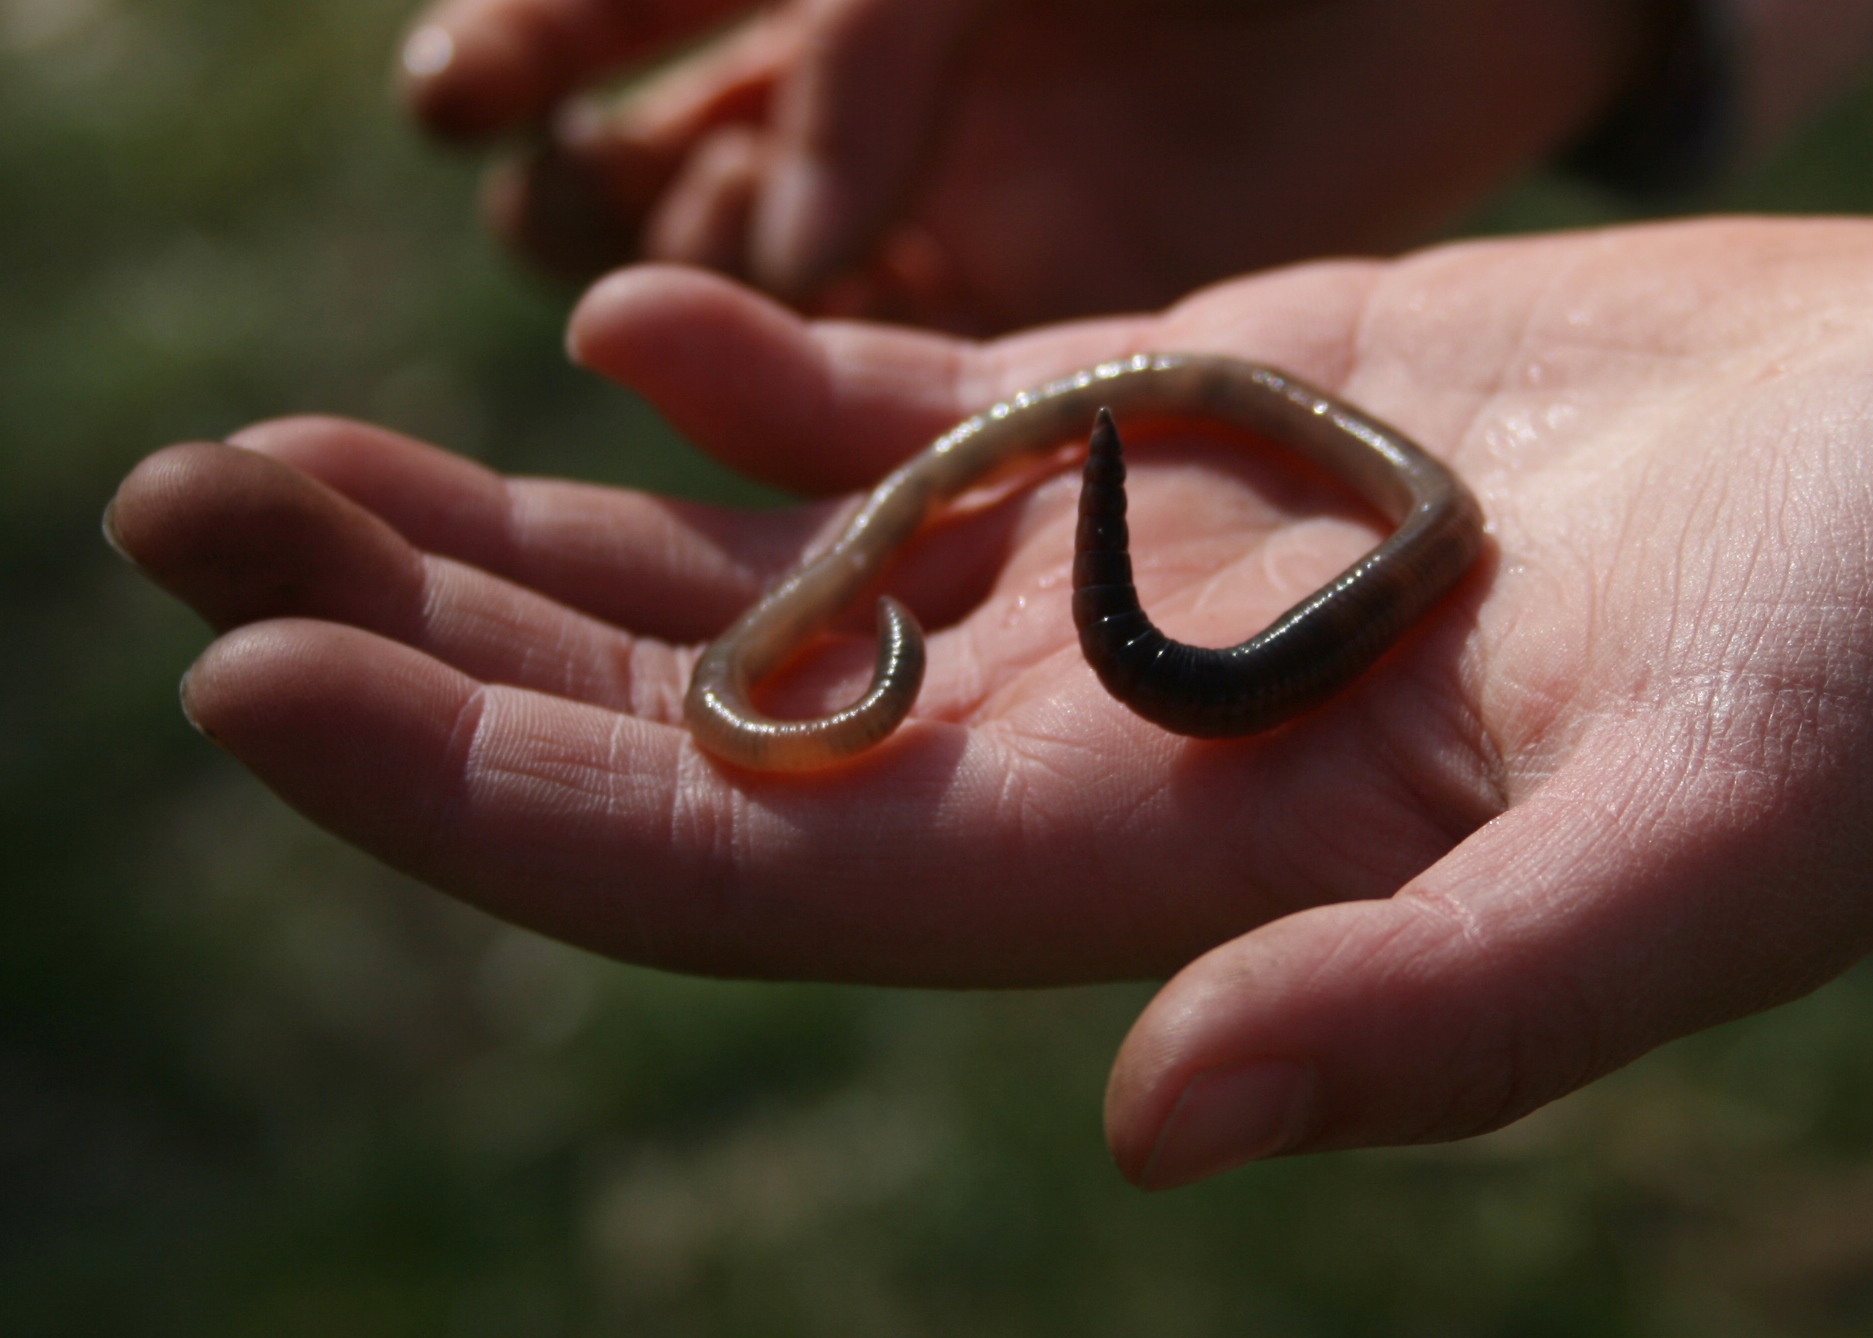 Earthworm in the hand